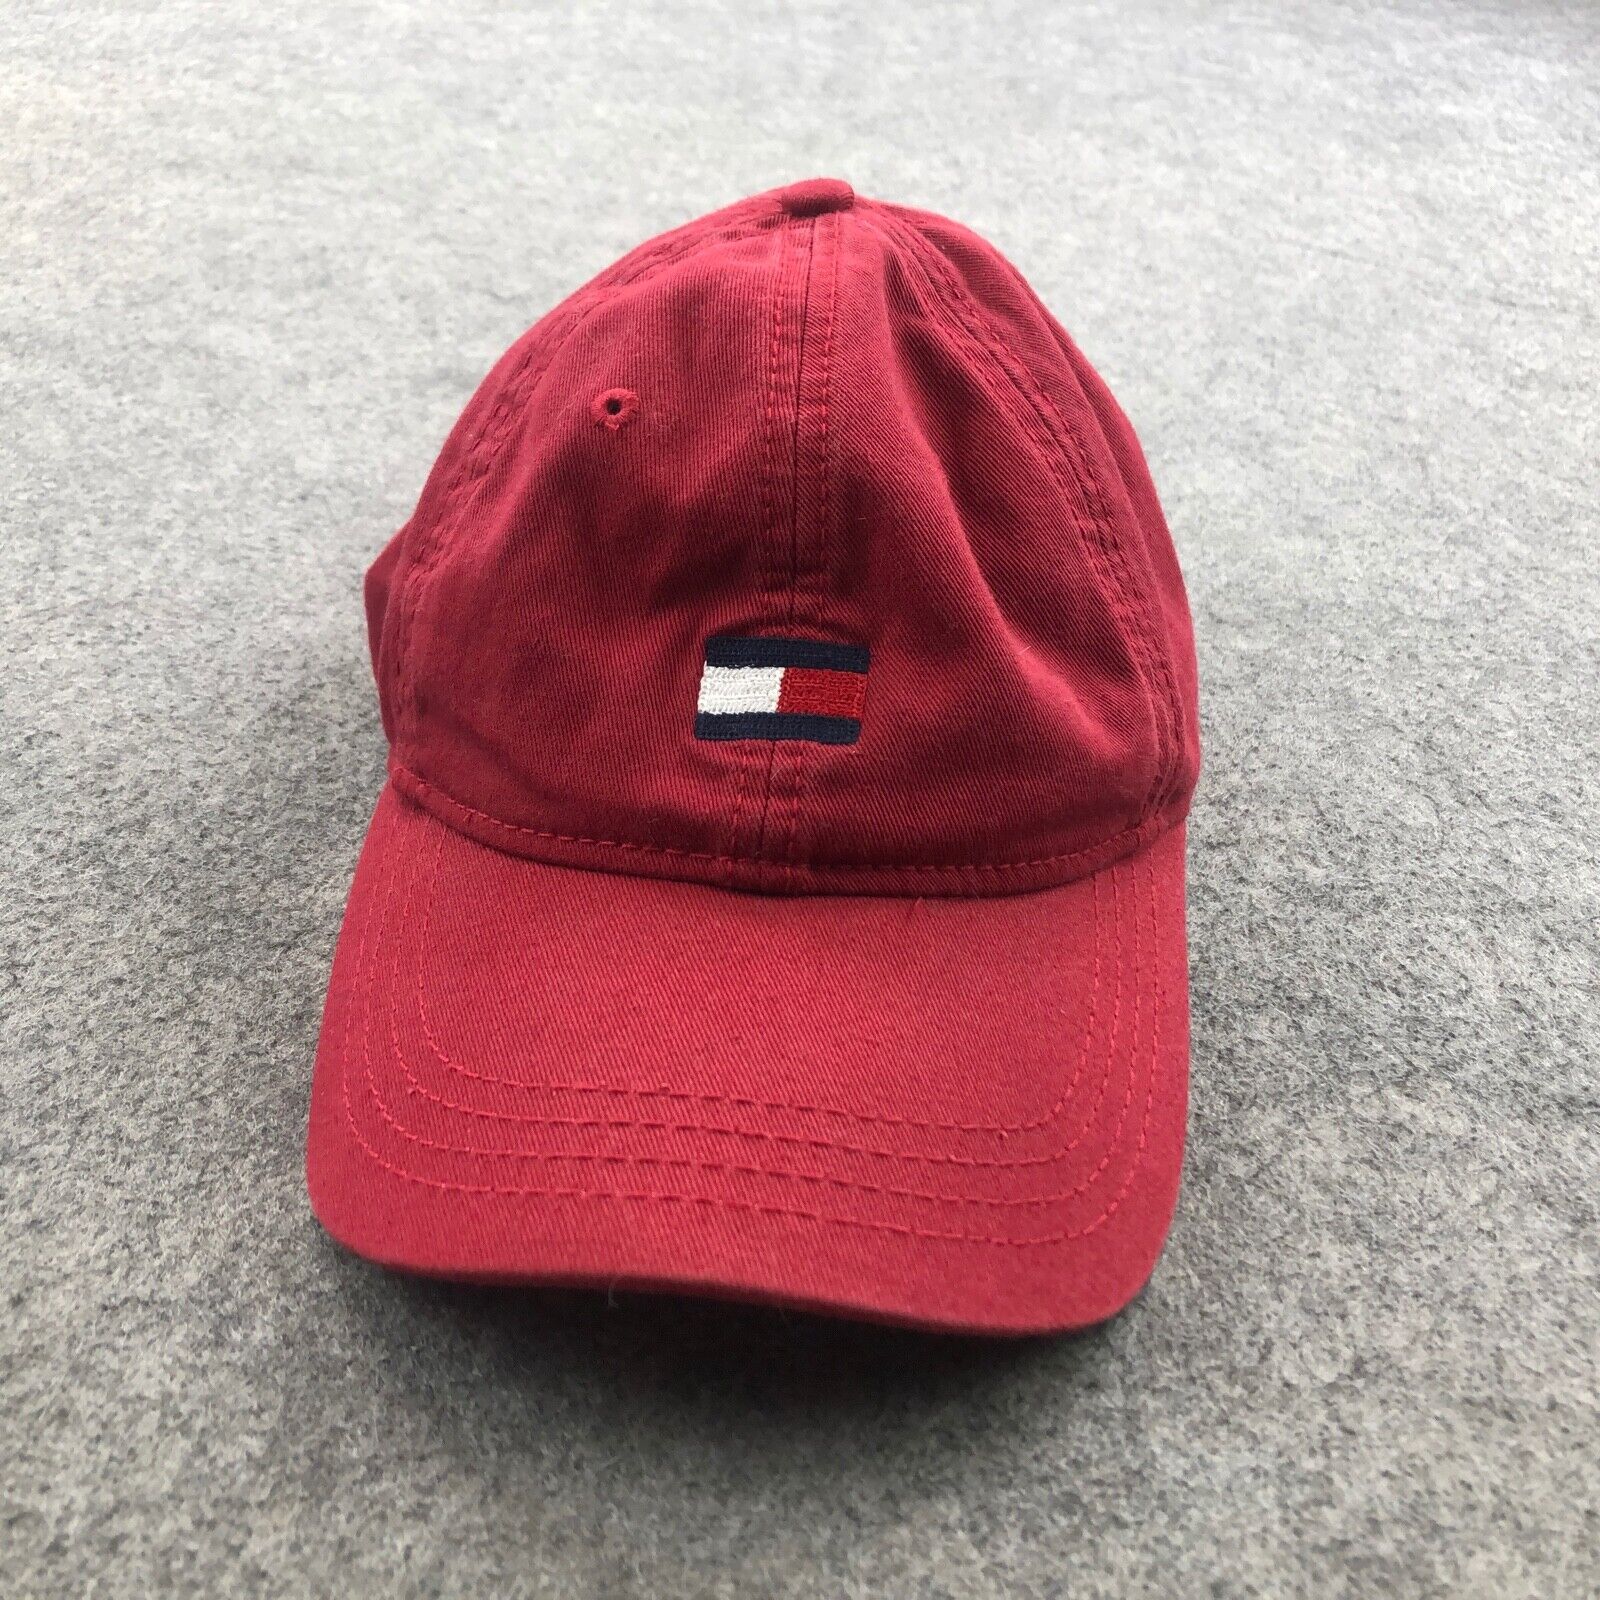 Tommy Hilfiger Hat Cap Adjustable Red Embroidered Preppy Dad Casual Mens